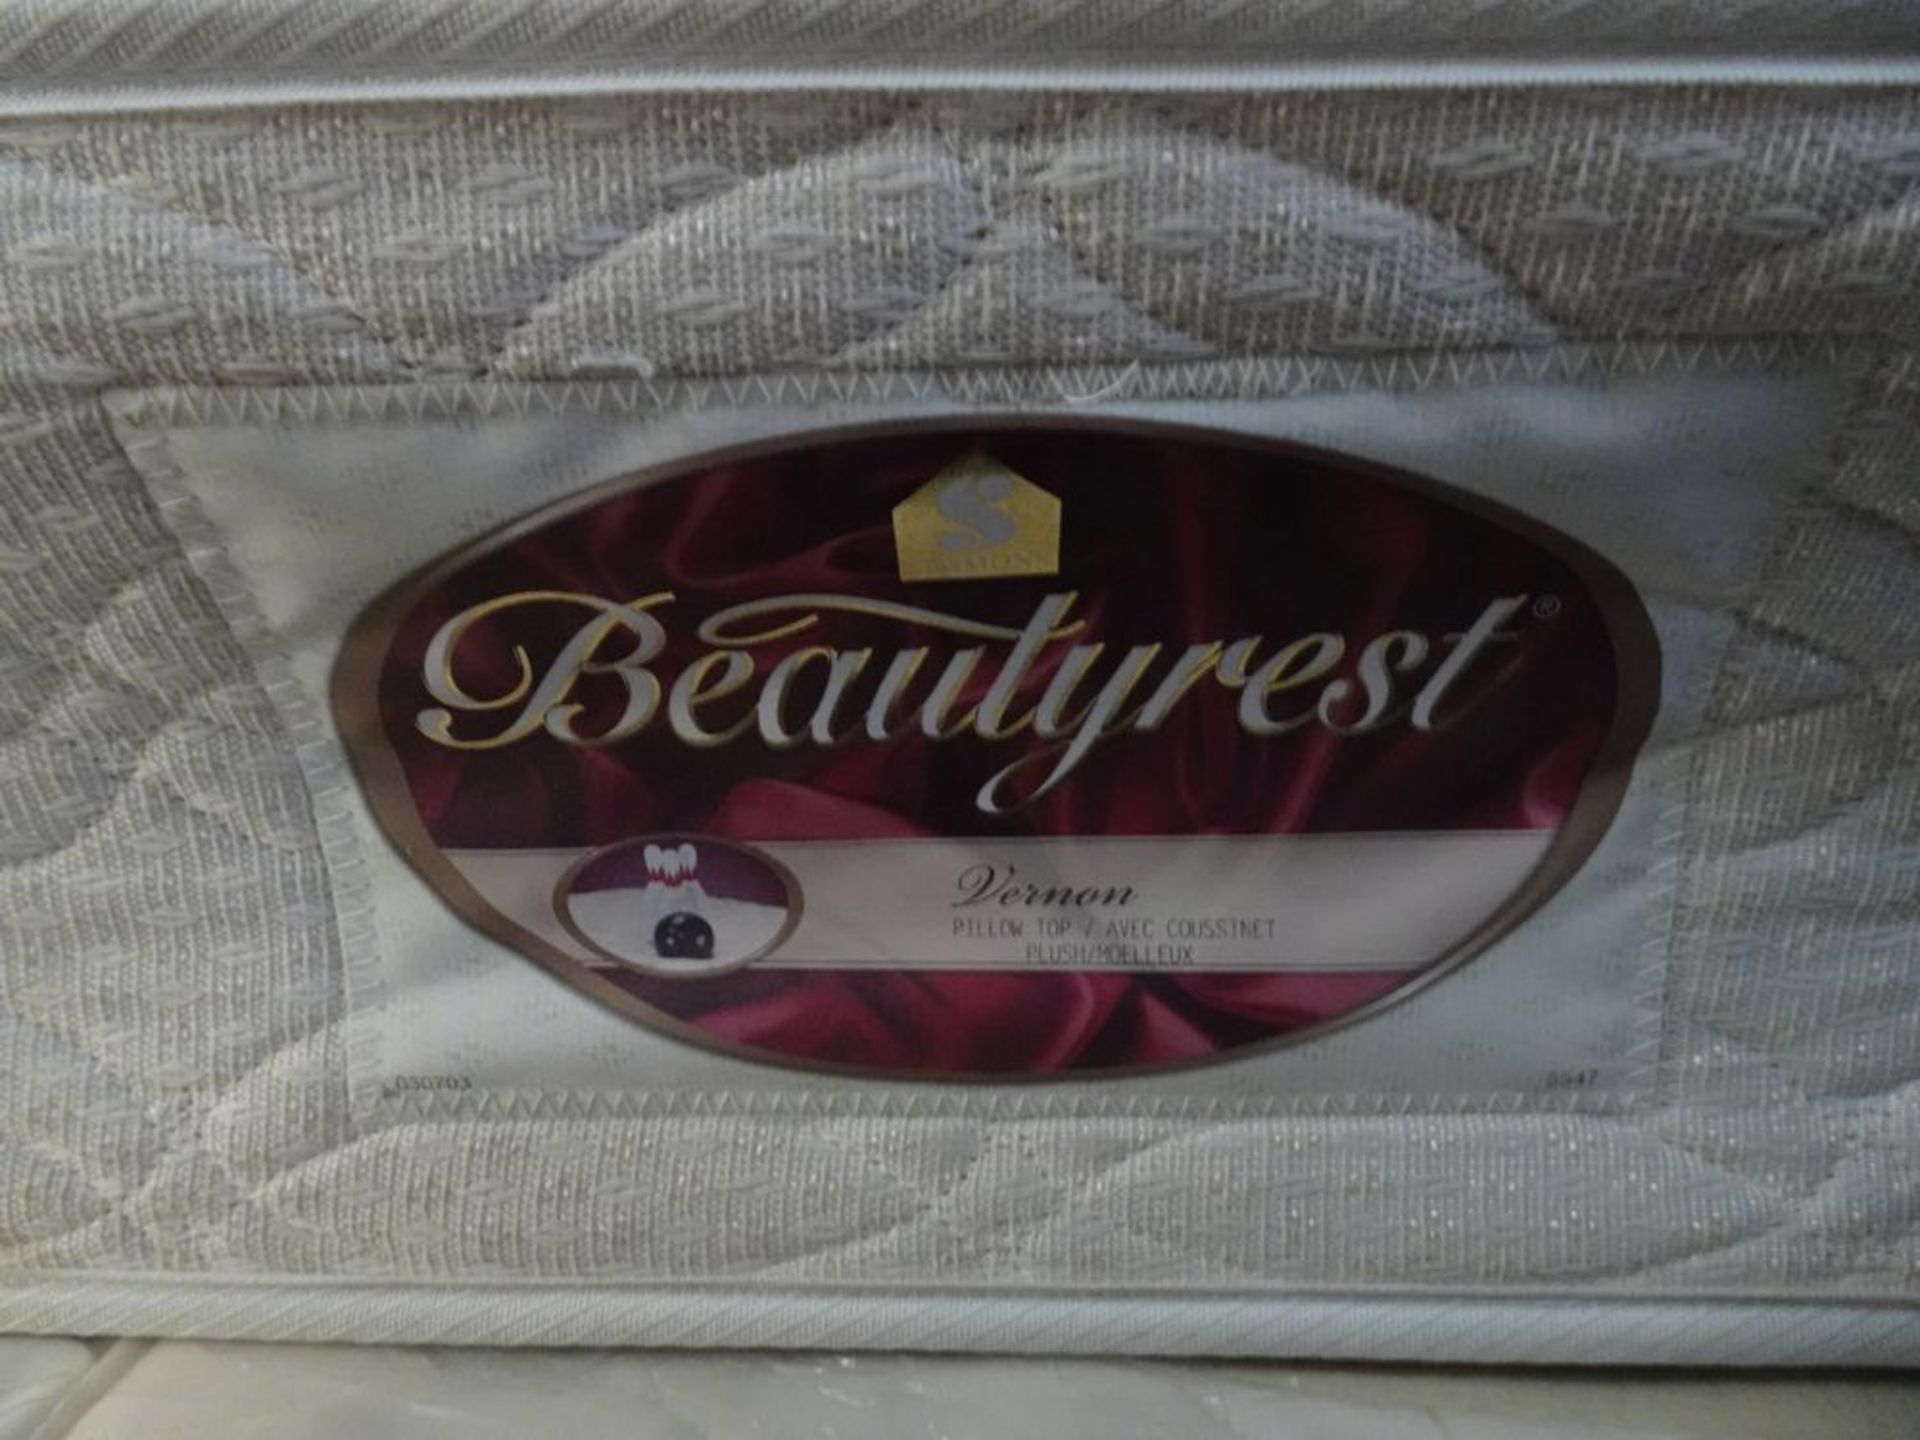 QUEEN SIZE - BEAUTYREST "VERNON" PILLOW TOP W/BOXSPRING - Image 3 of 5